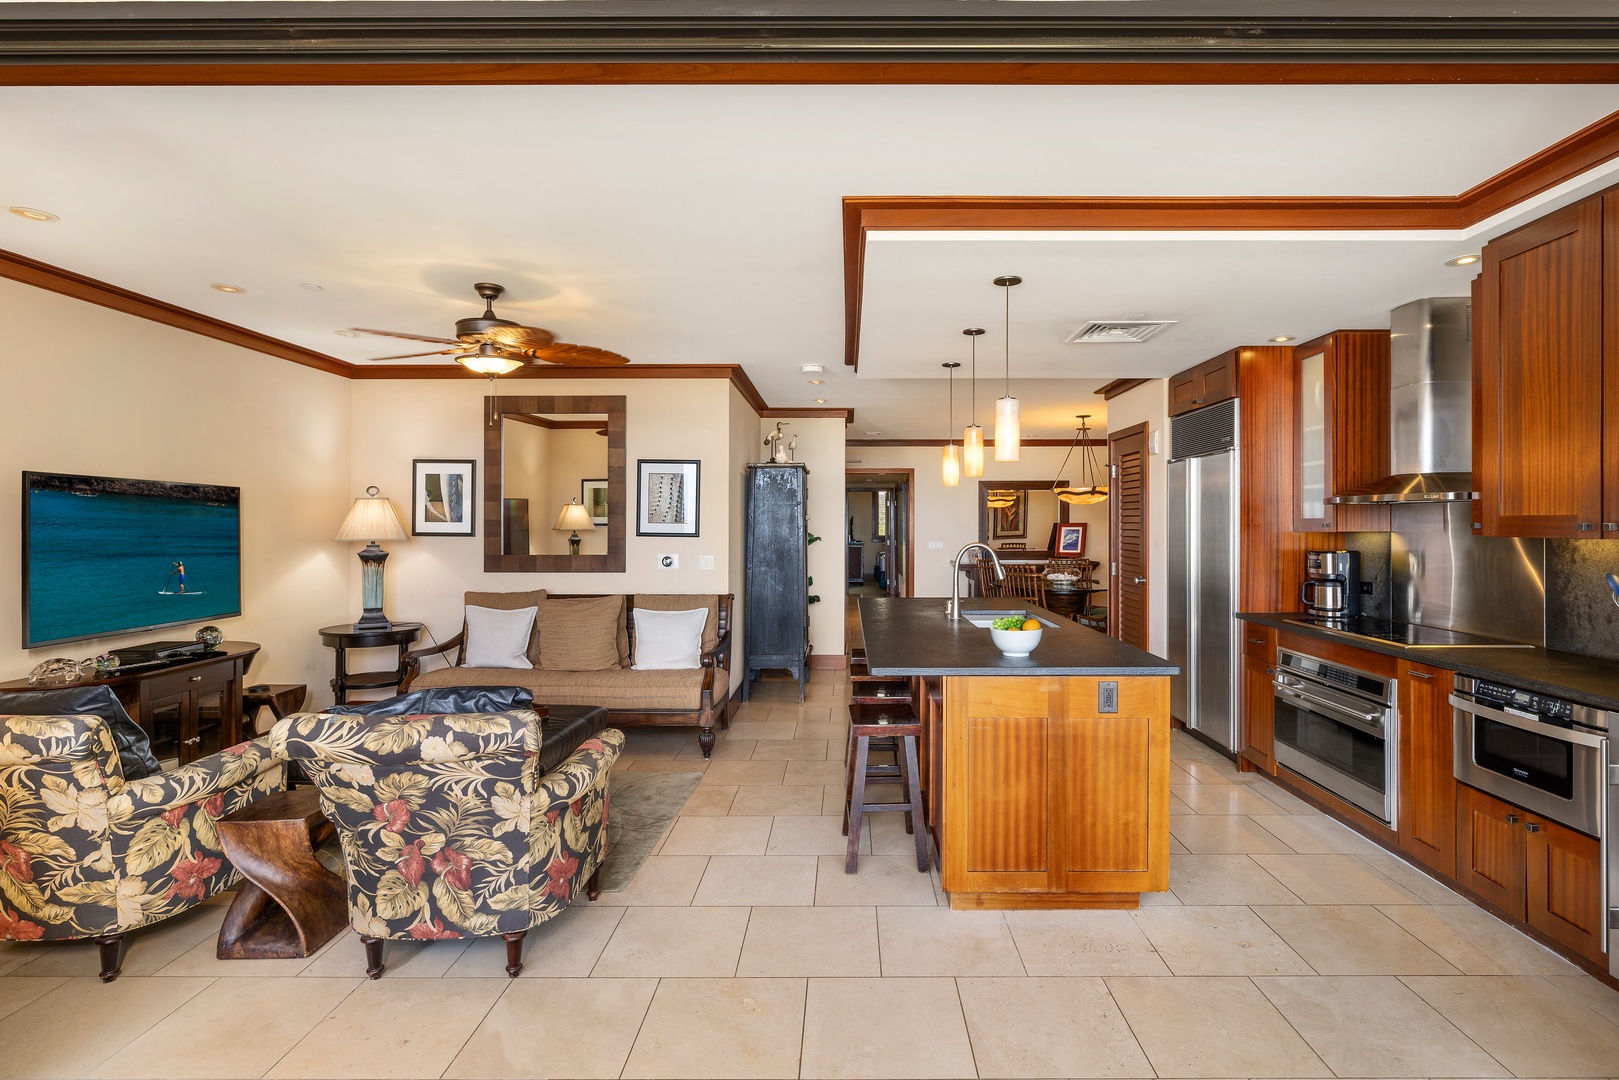 Kapolei Vacation Rentals, Ko Olina Beach Villas O805 - Looking at the open concept plan with seamless connection between the dining, kitchen and living areas.